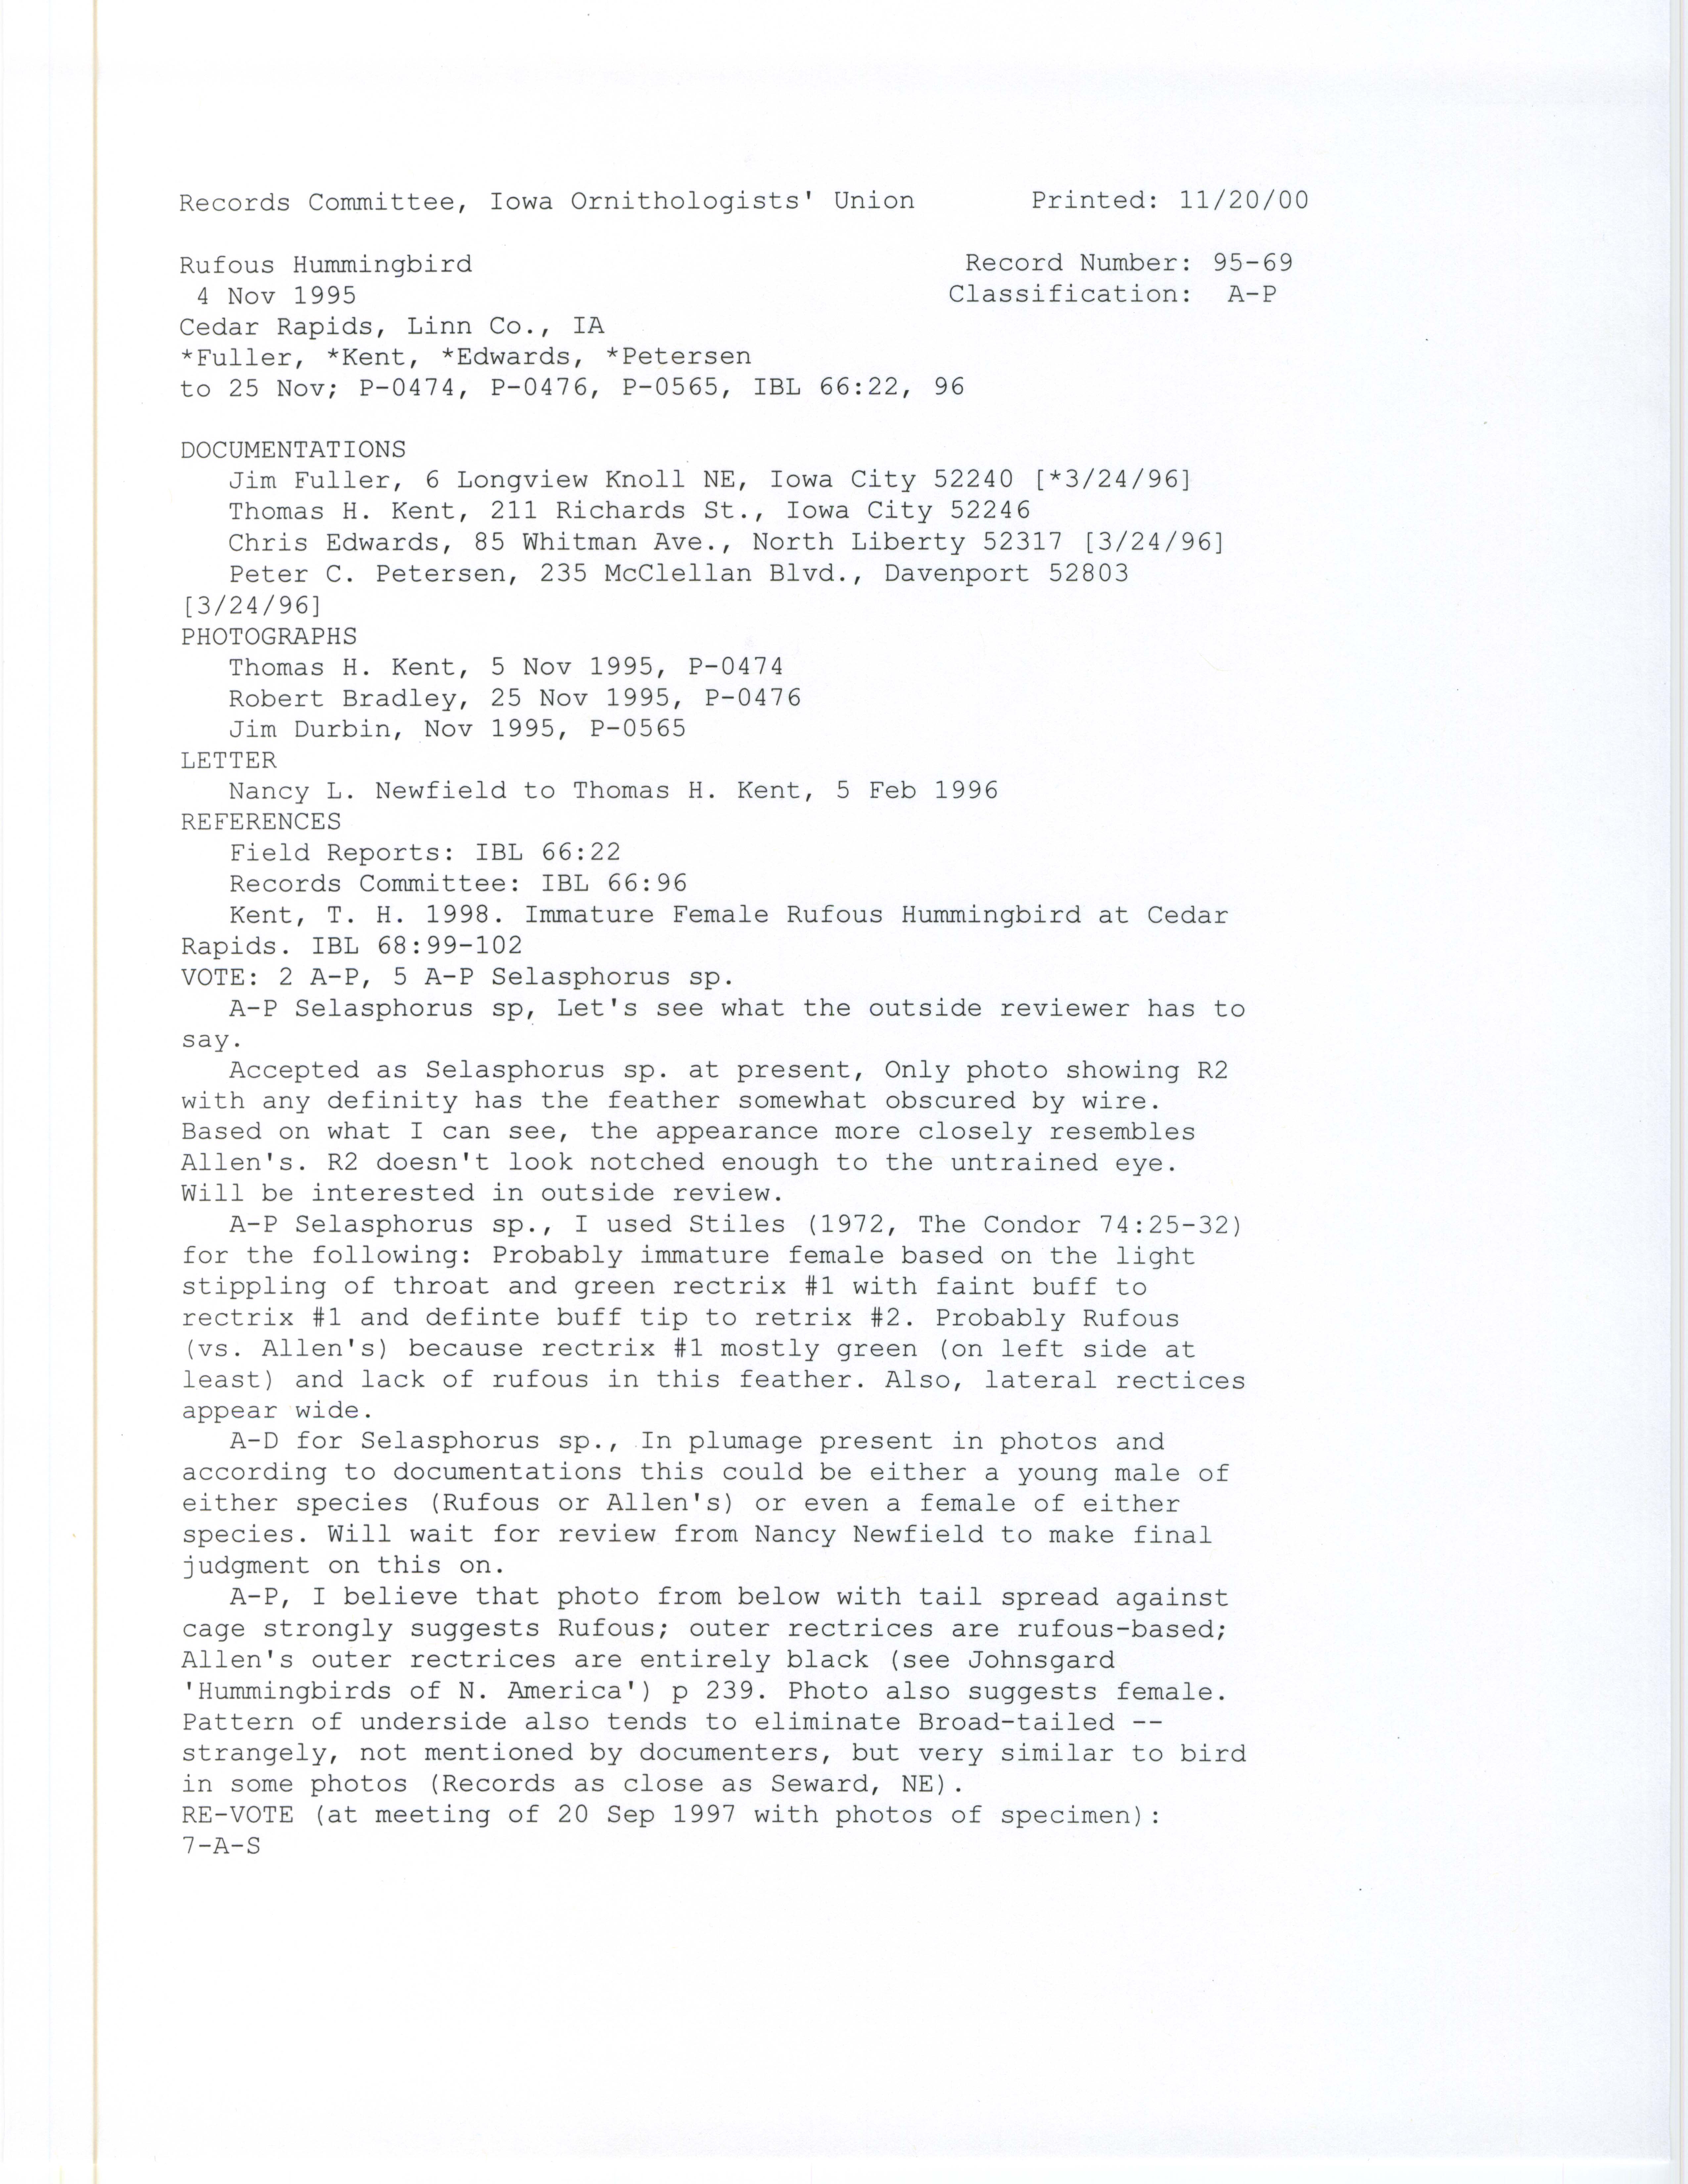 Records Committee review for rare bird sighting for Rufous Hummingbird at Cedar Rapids, 1995